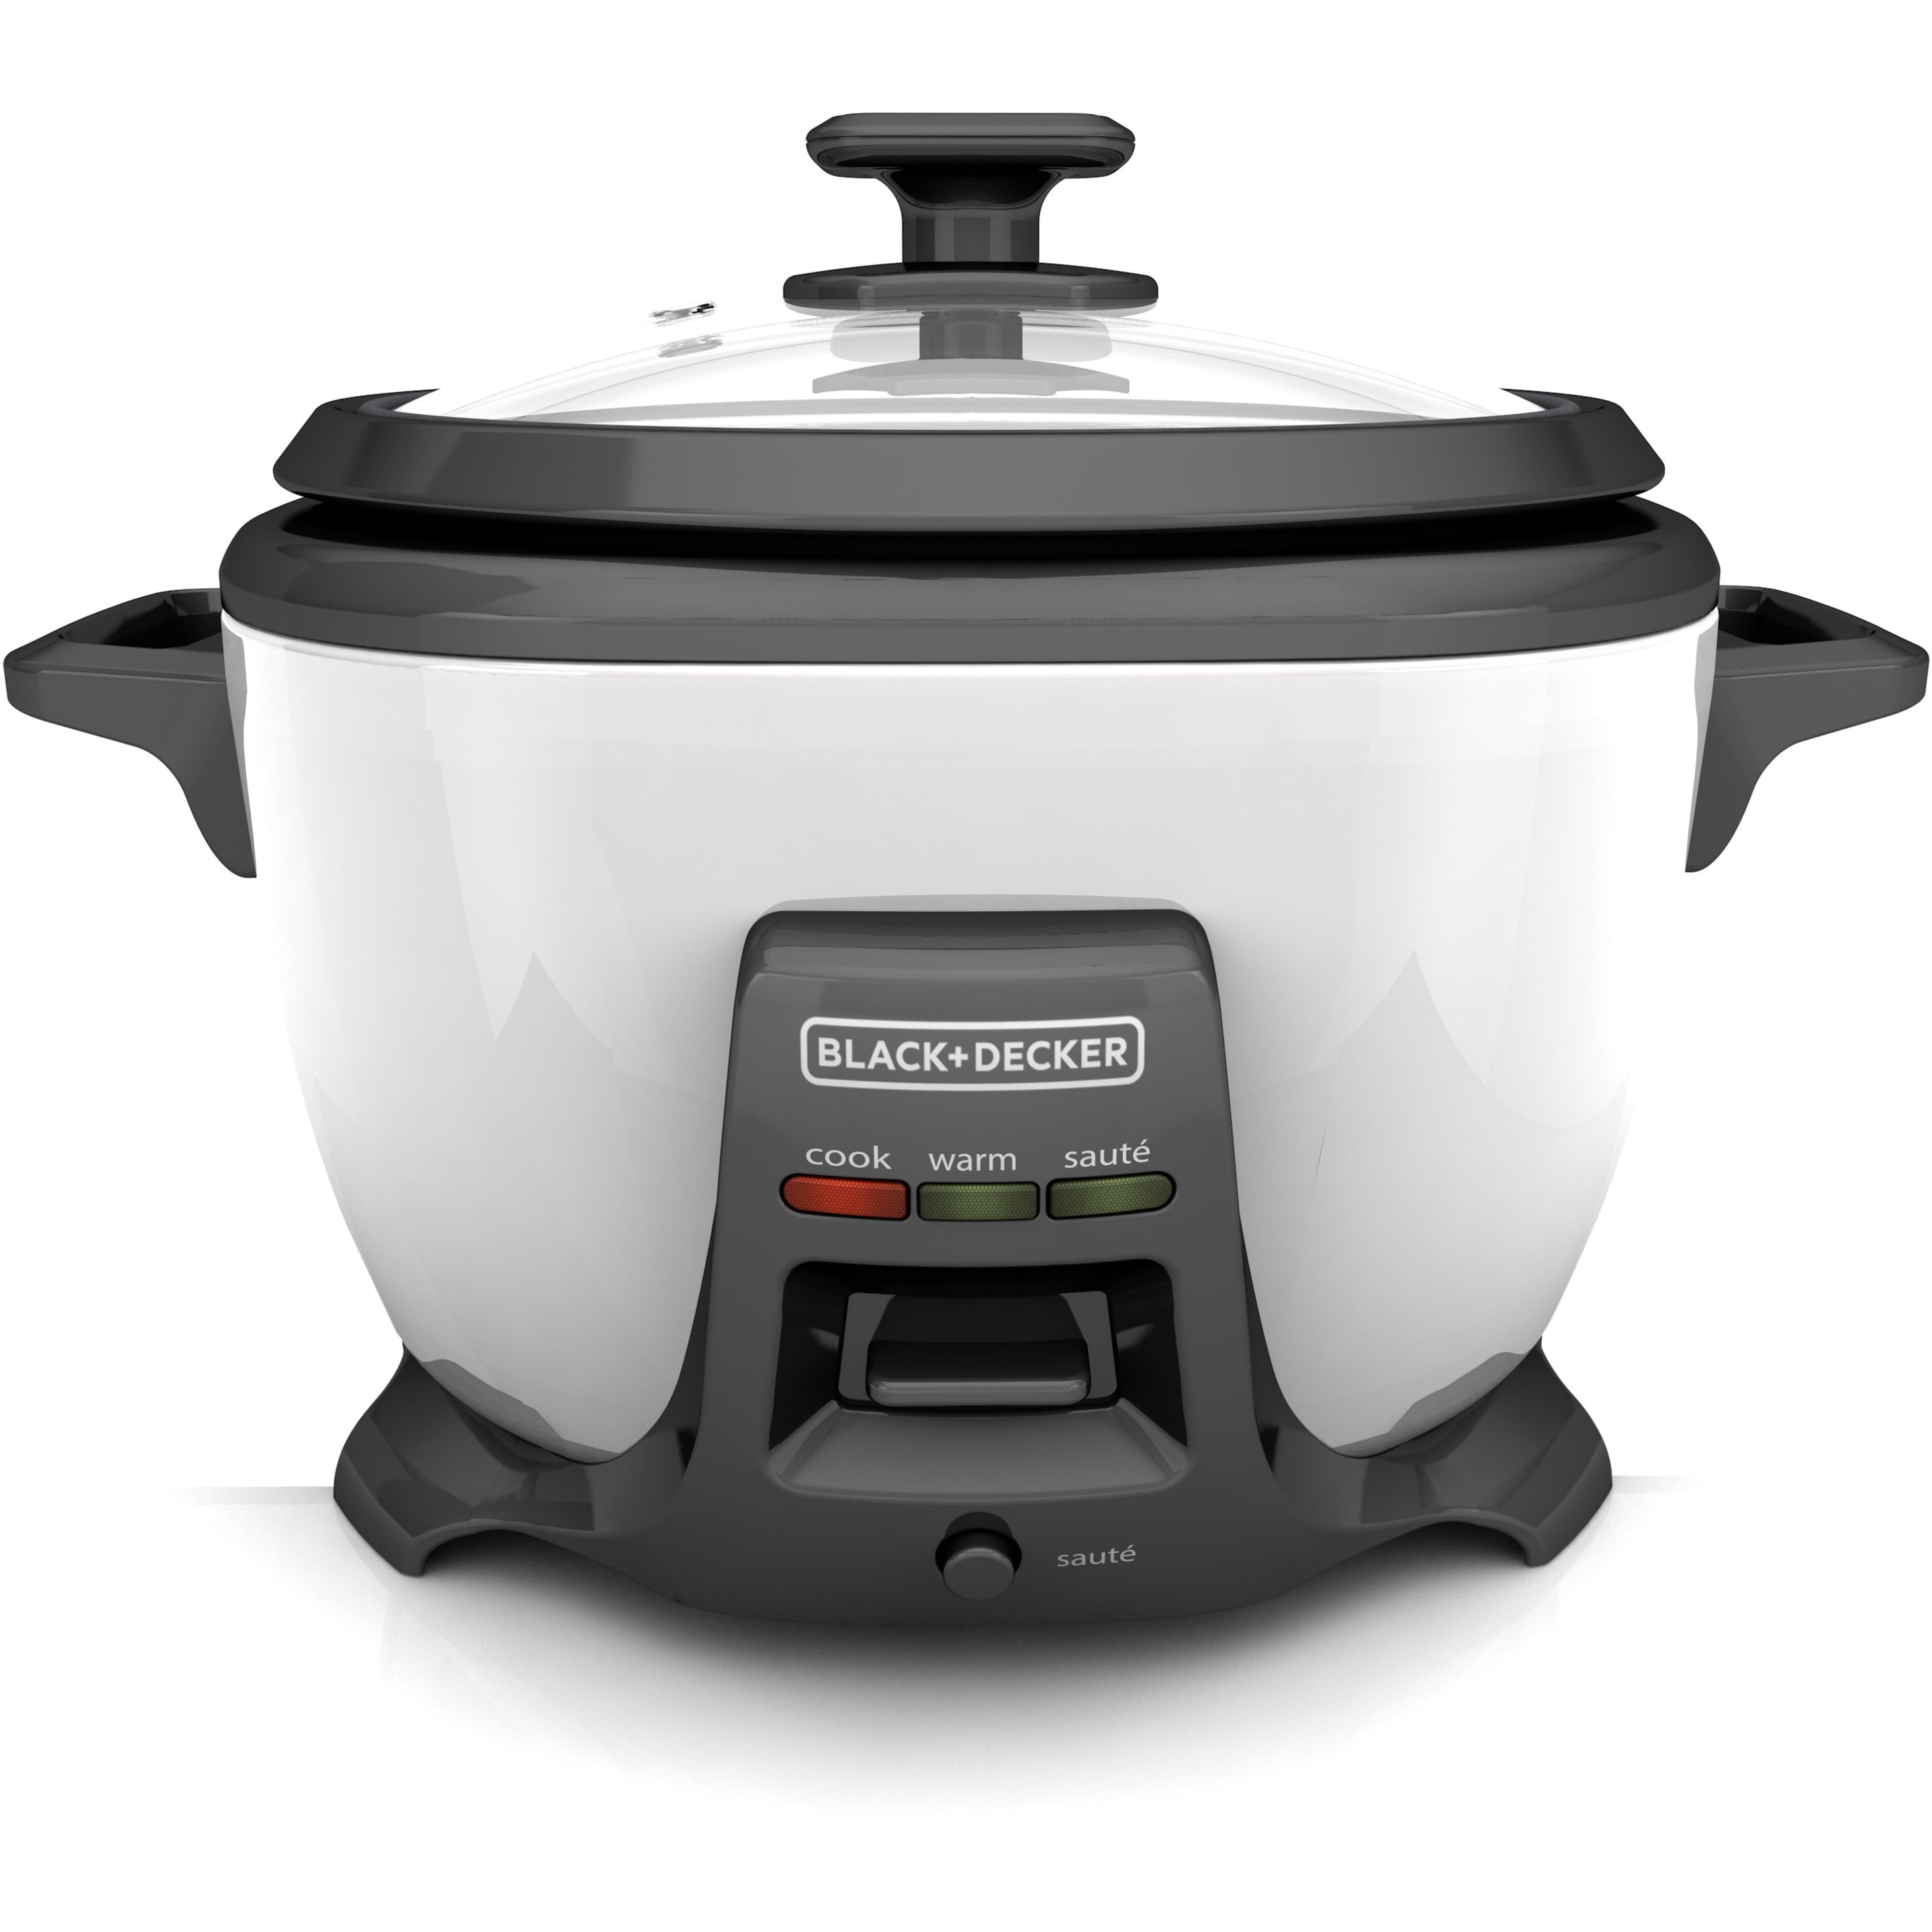 BLACK+DECKER 2-in-1 Rice Cooker and Food Steamer, 14 Cup (7 Cup